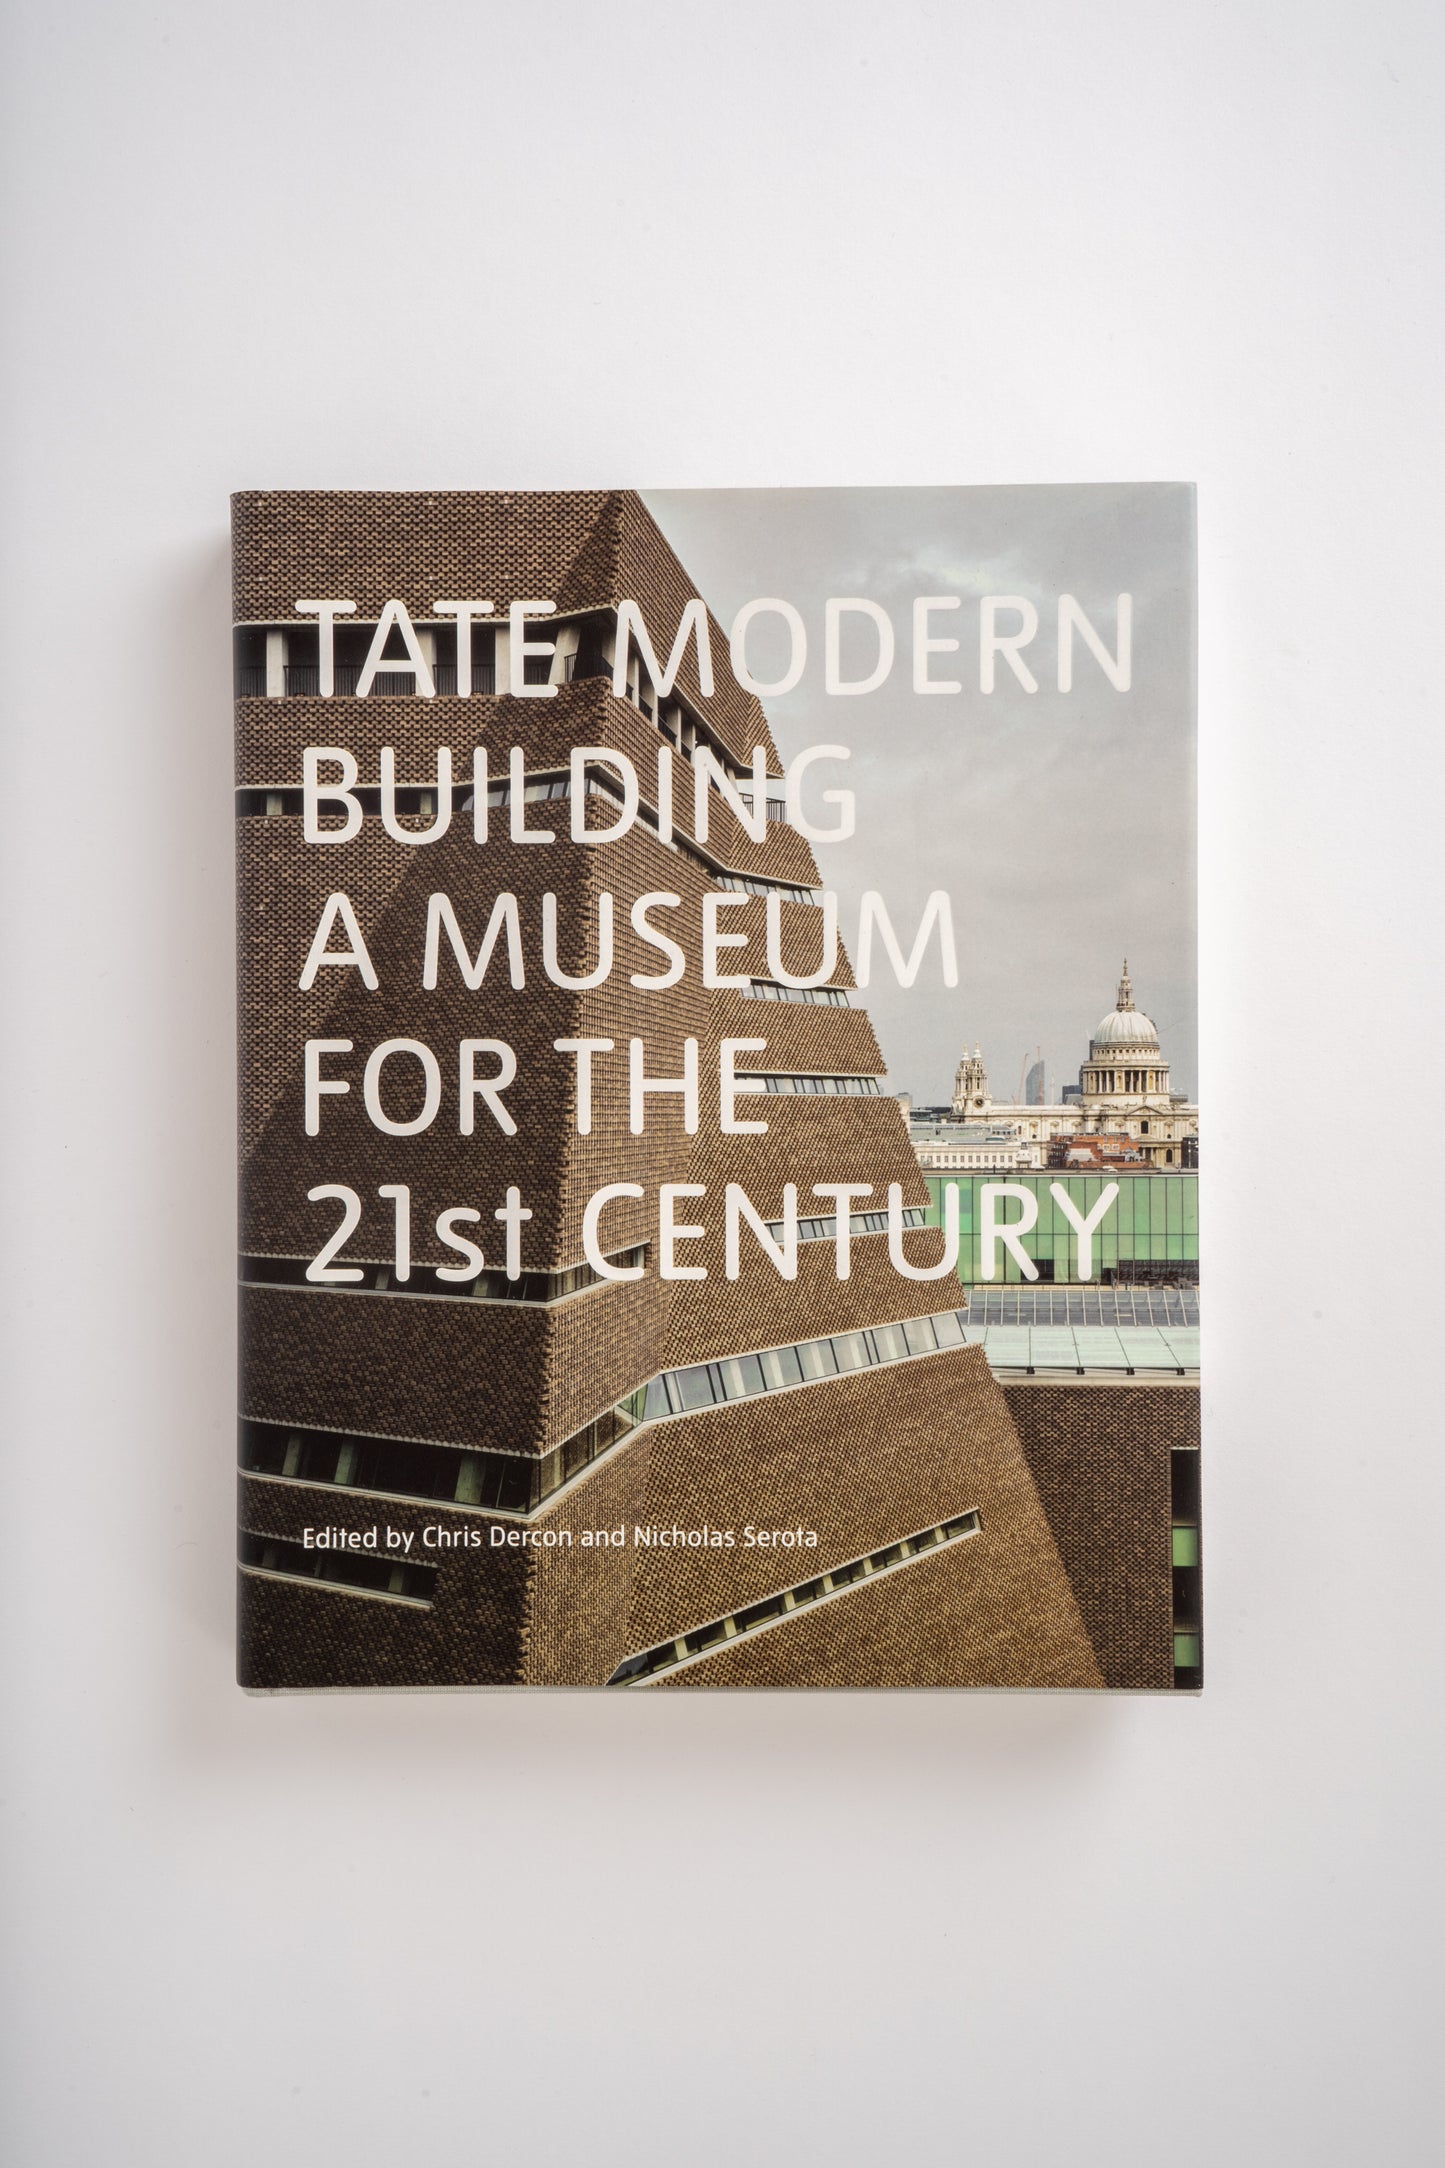 Oxfam Bookshop 'Tate Modern Building a Museum for the 21st Century'